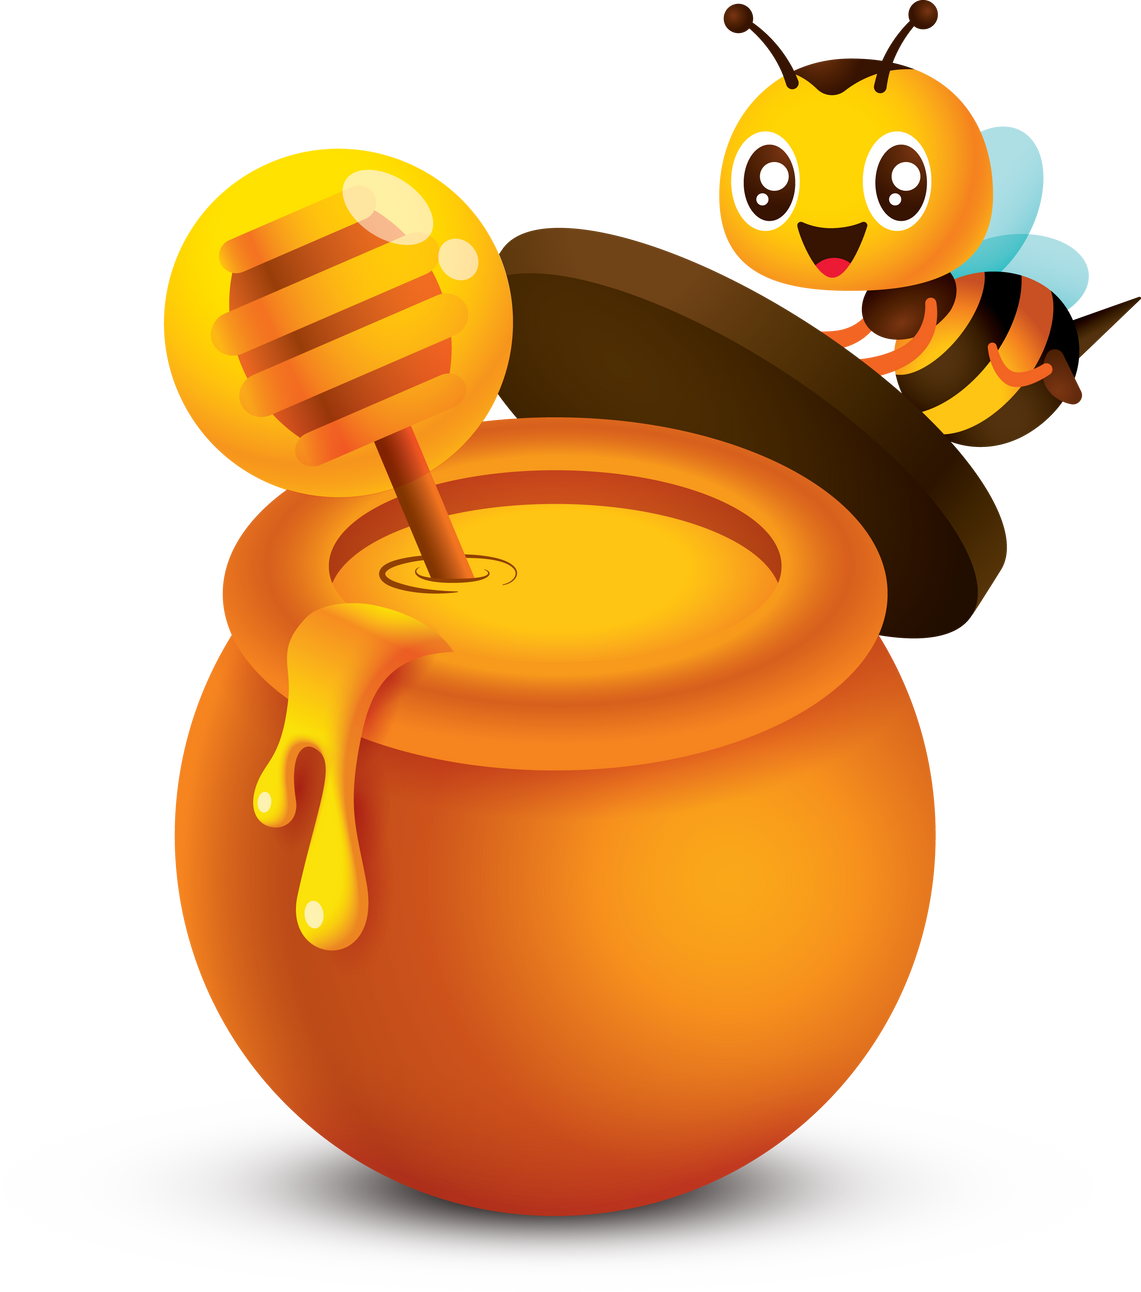 Cute bee open honey pot cover with honey dipper inside the pot character illustration